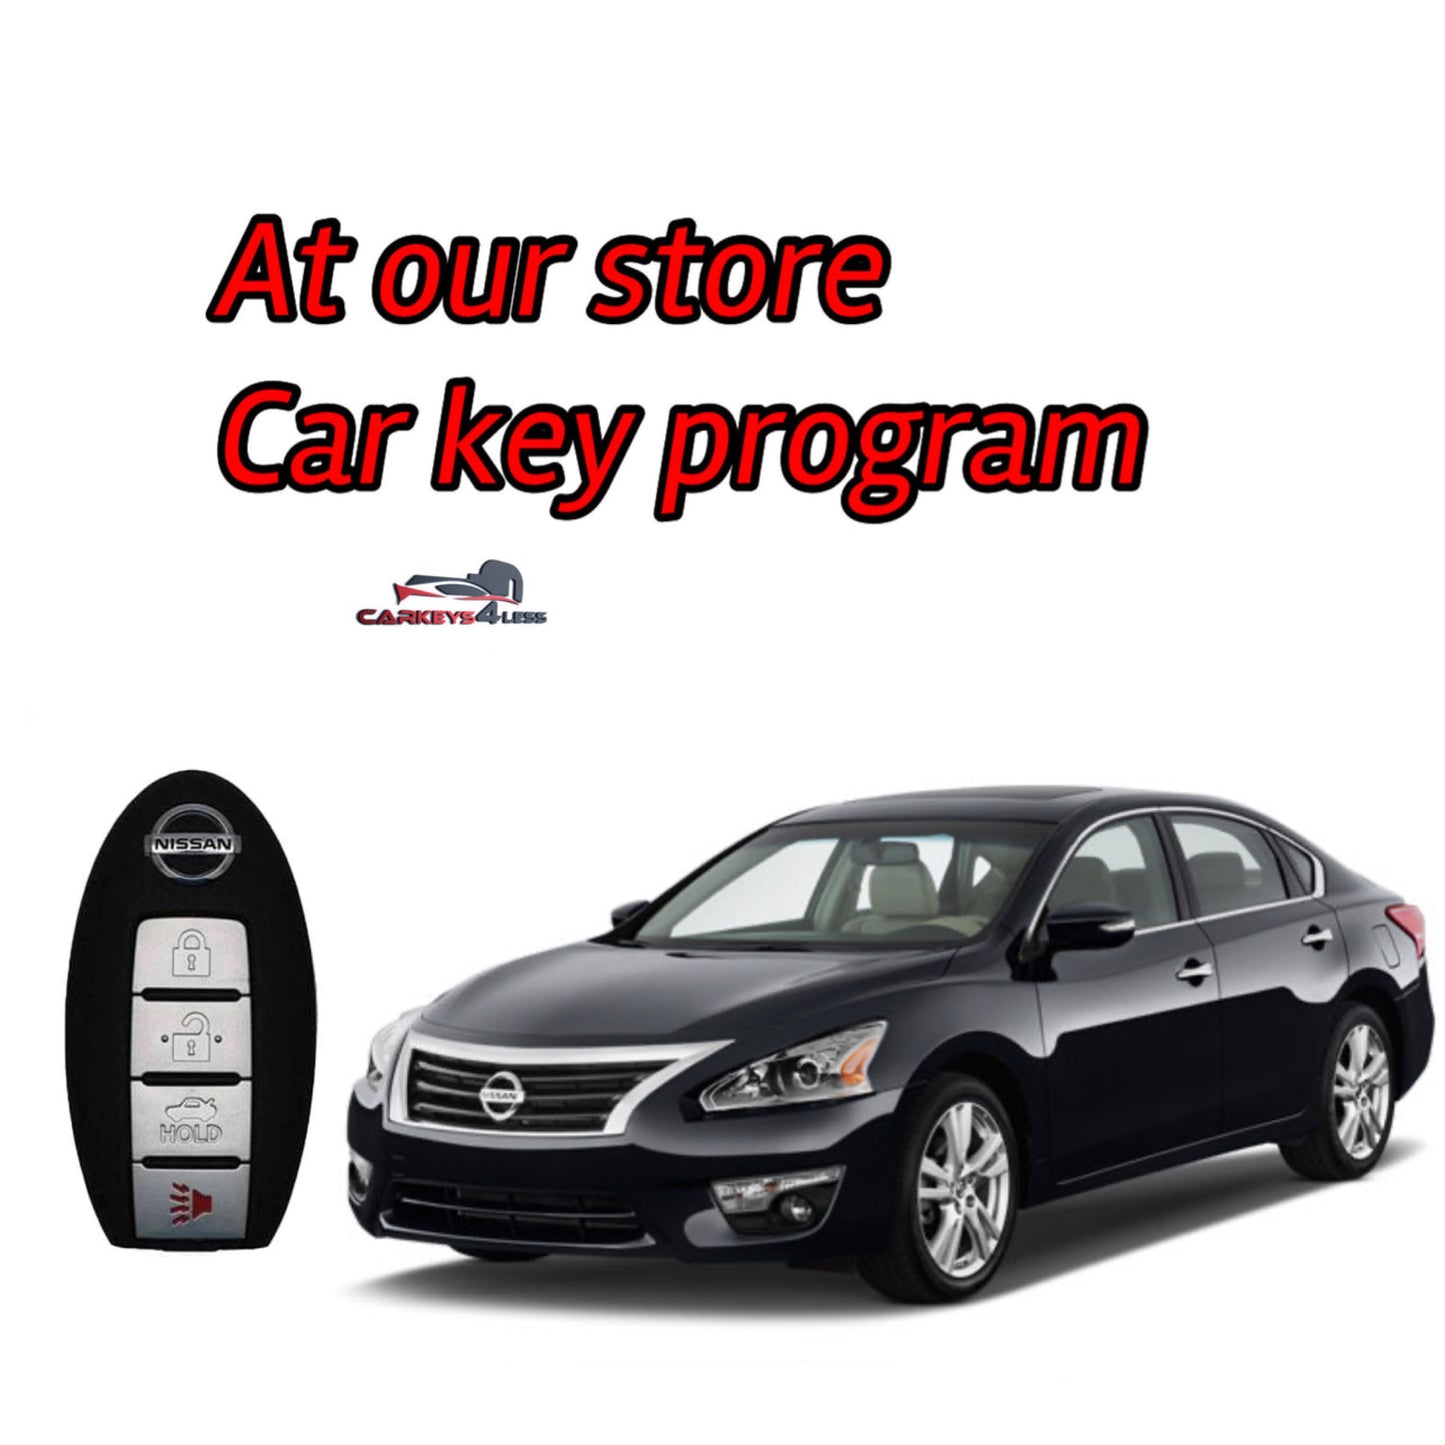 At our store an oem refurbished nissan car key replacement